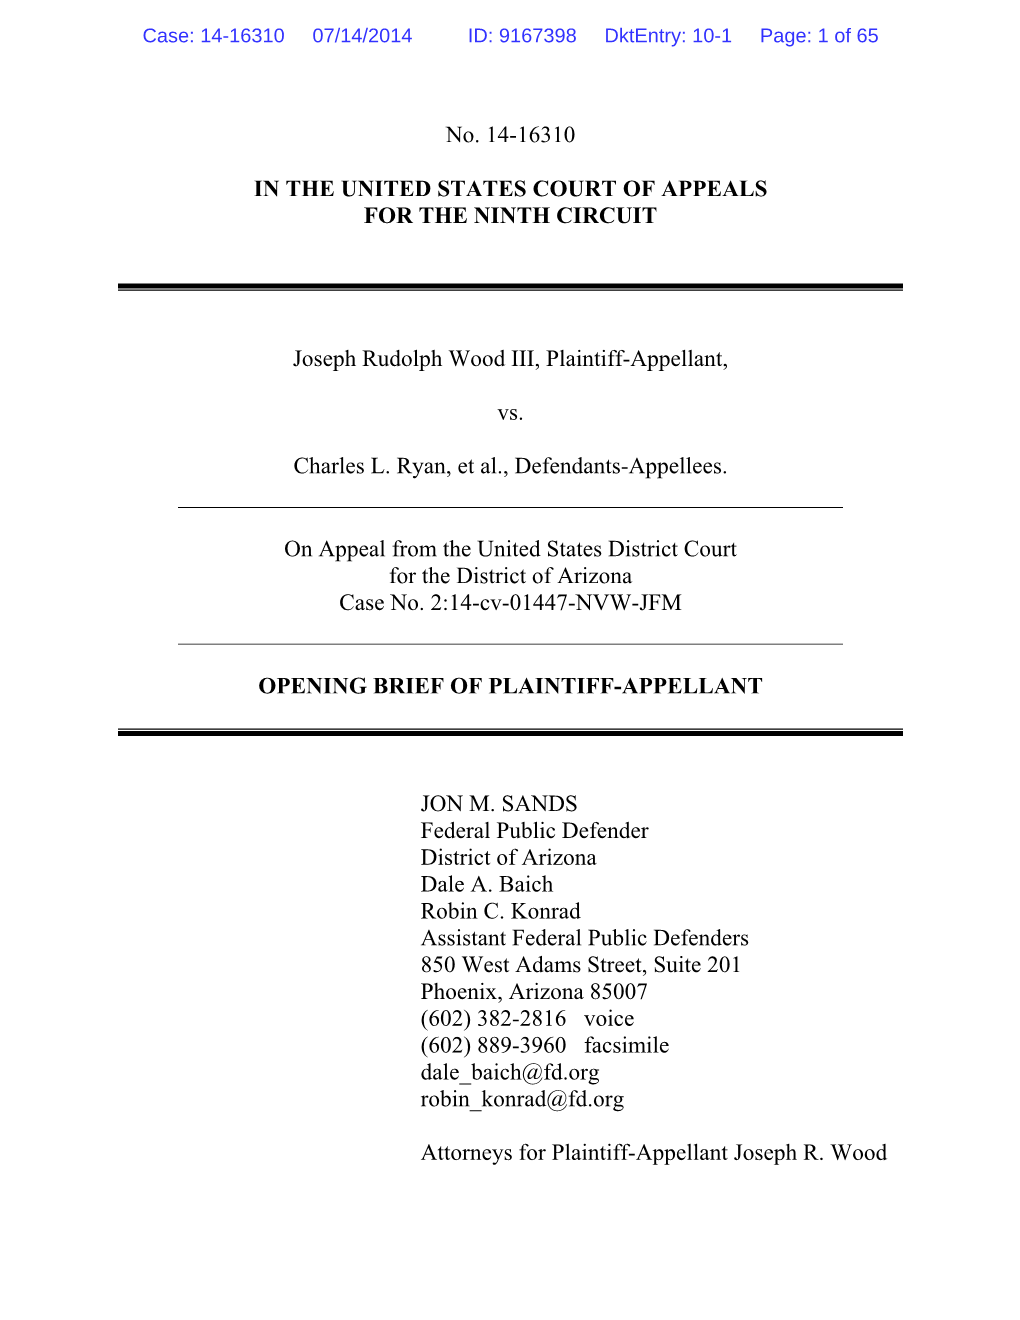 No. 14-16310 in the UNITED STATES COURT of APPEALS